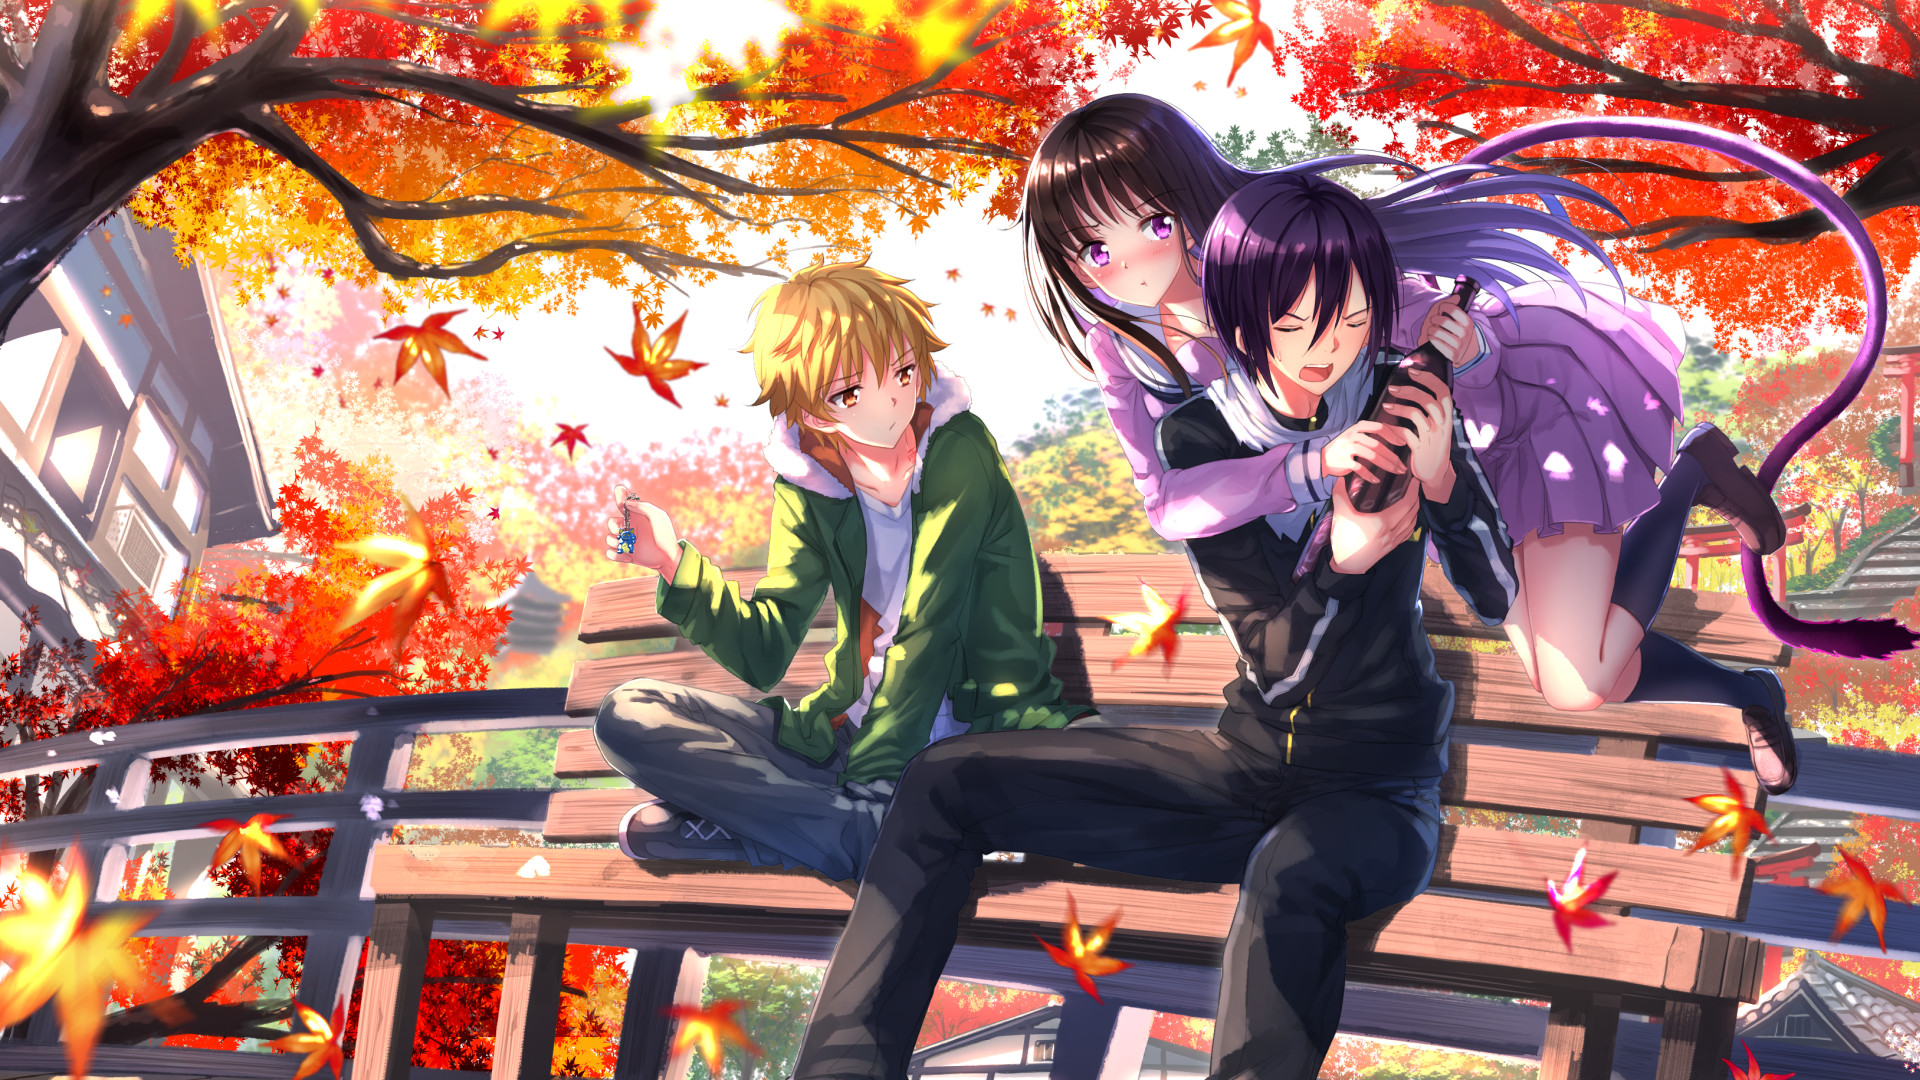 HD Wallpaper Background ID662281. Anime Noragami